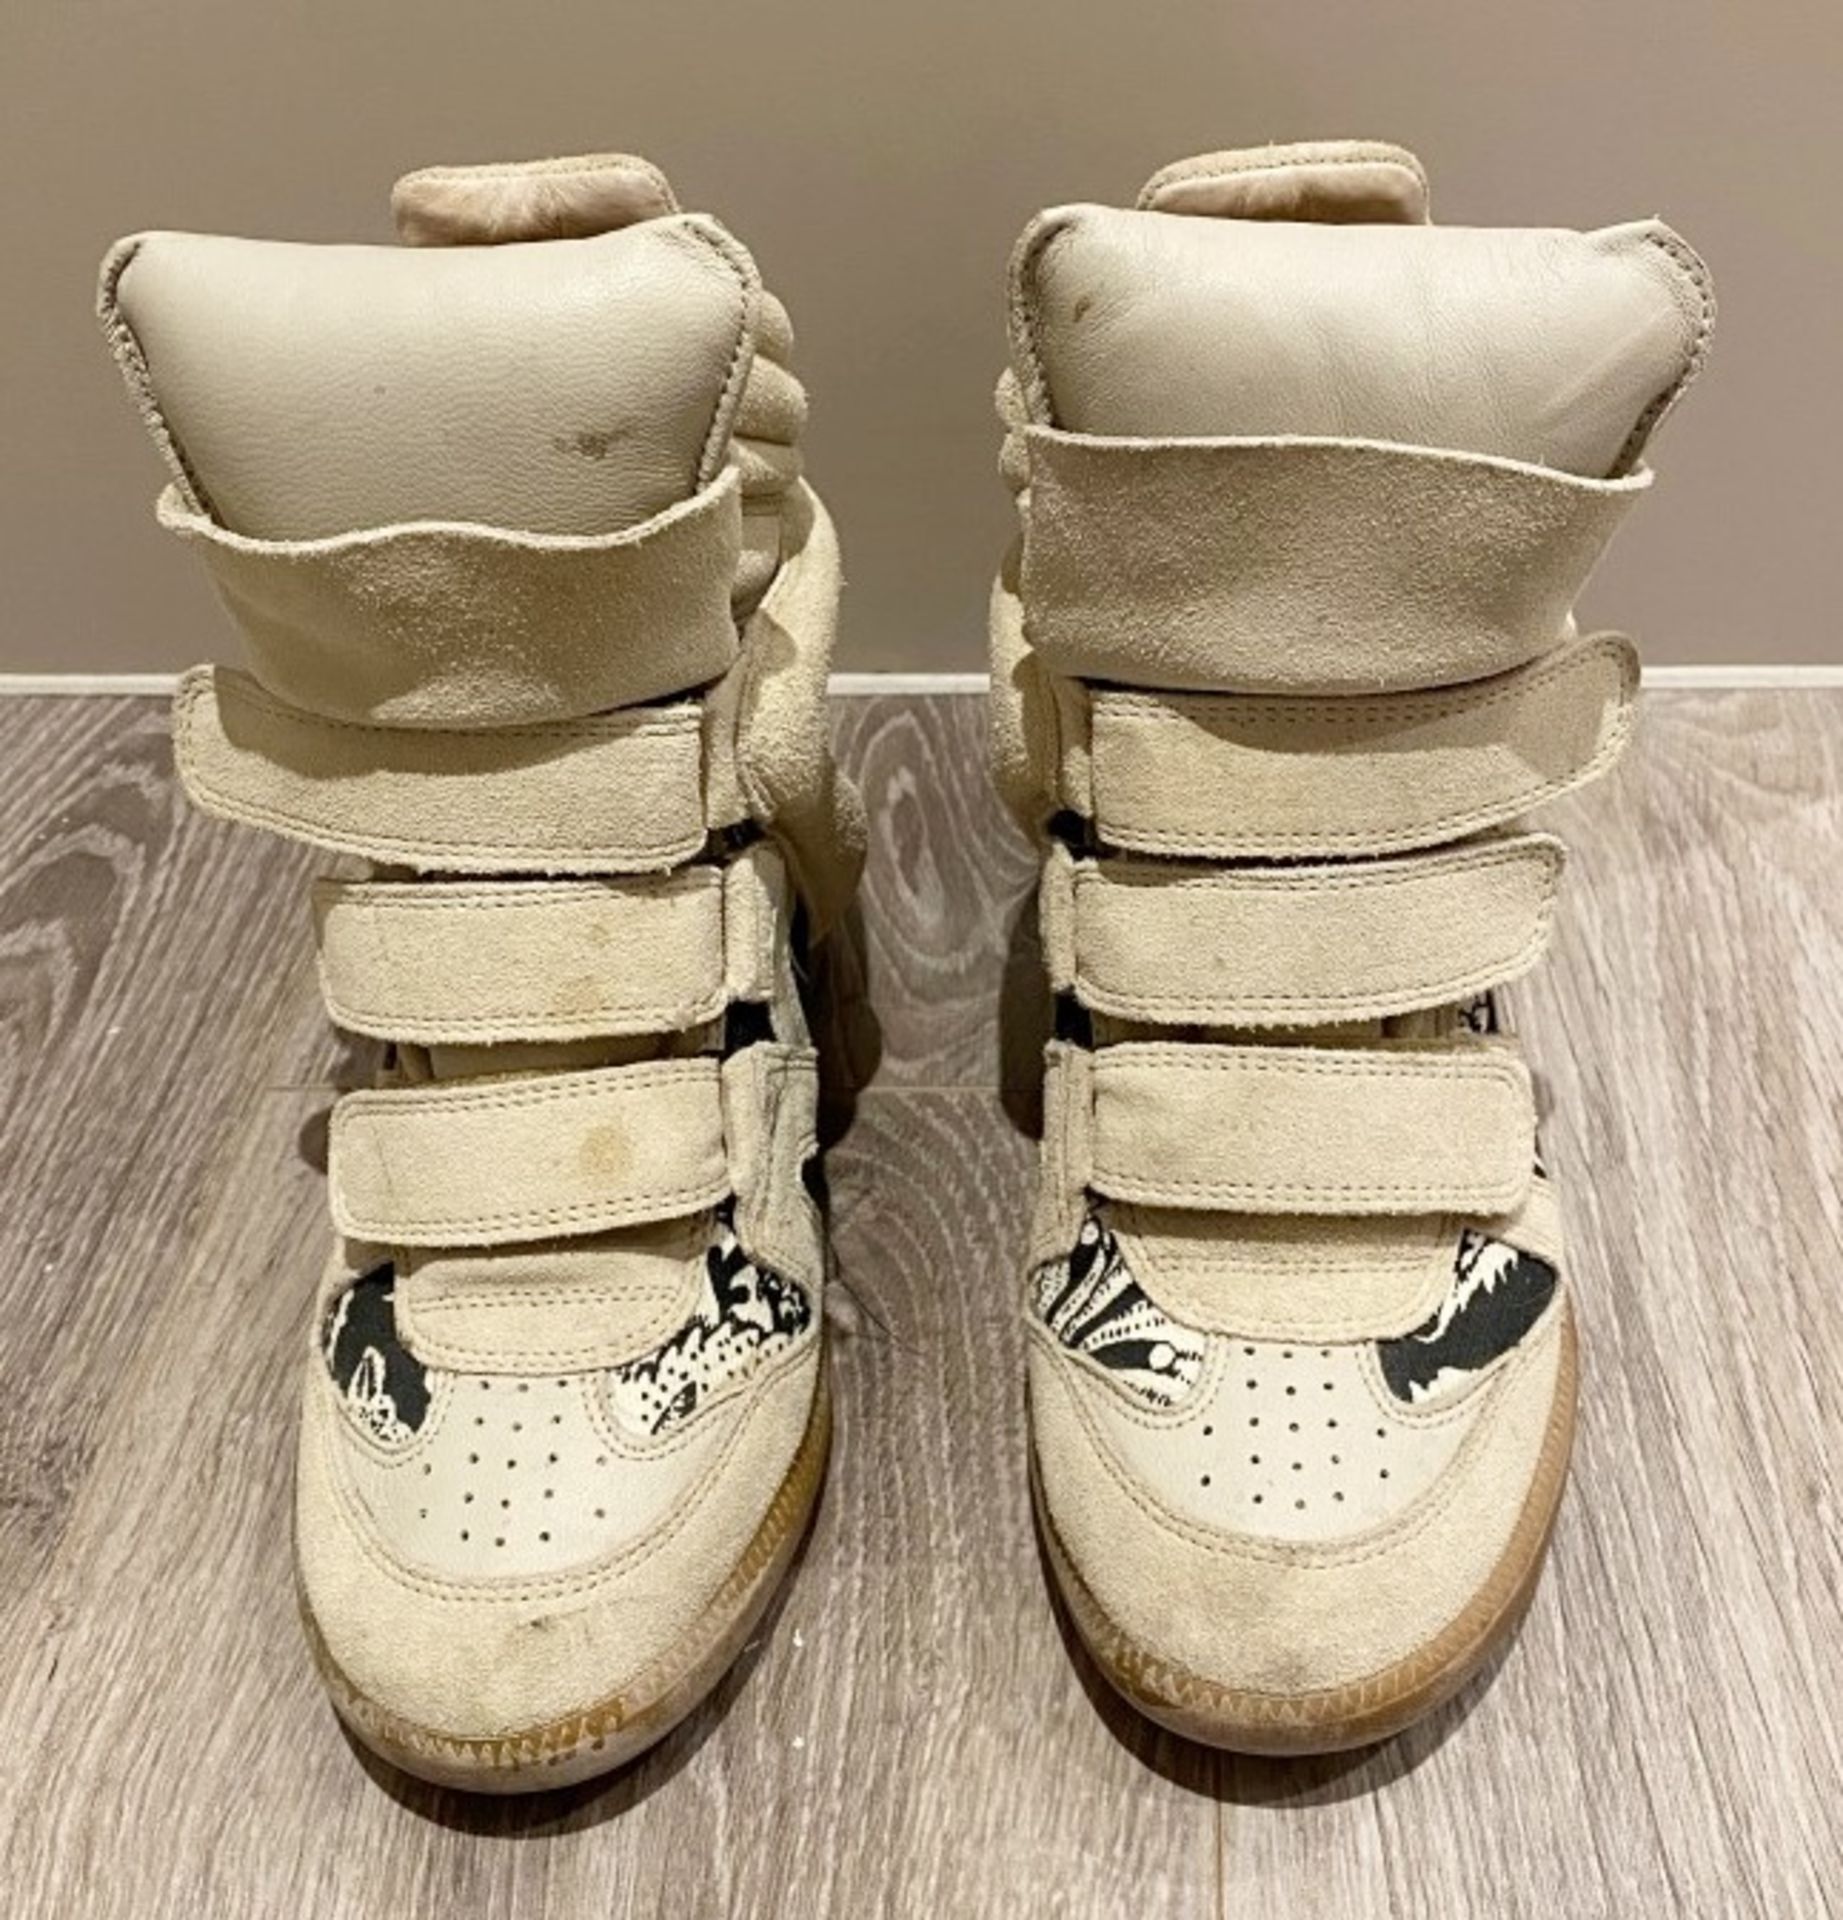 1 x Pair Of Genuine Isabel Marant Boots In Crème And Black - Size: 36 - Preowned in Very Good Condit - Image 2 of 4